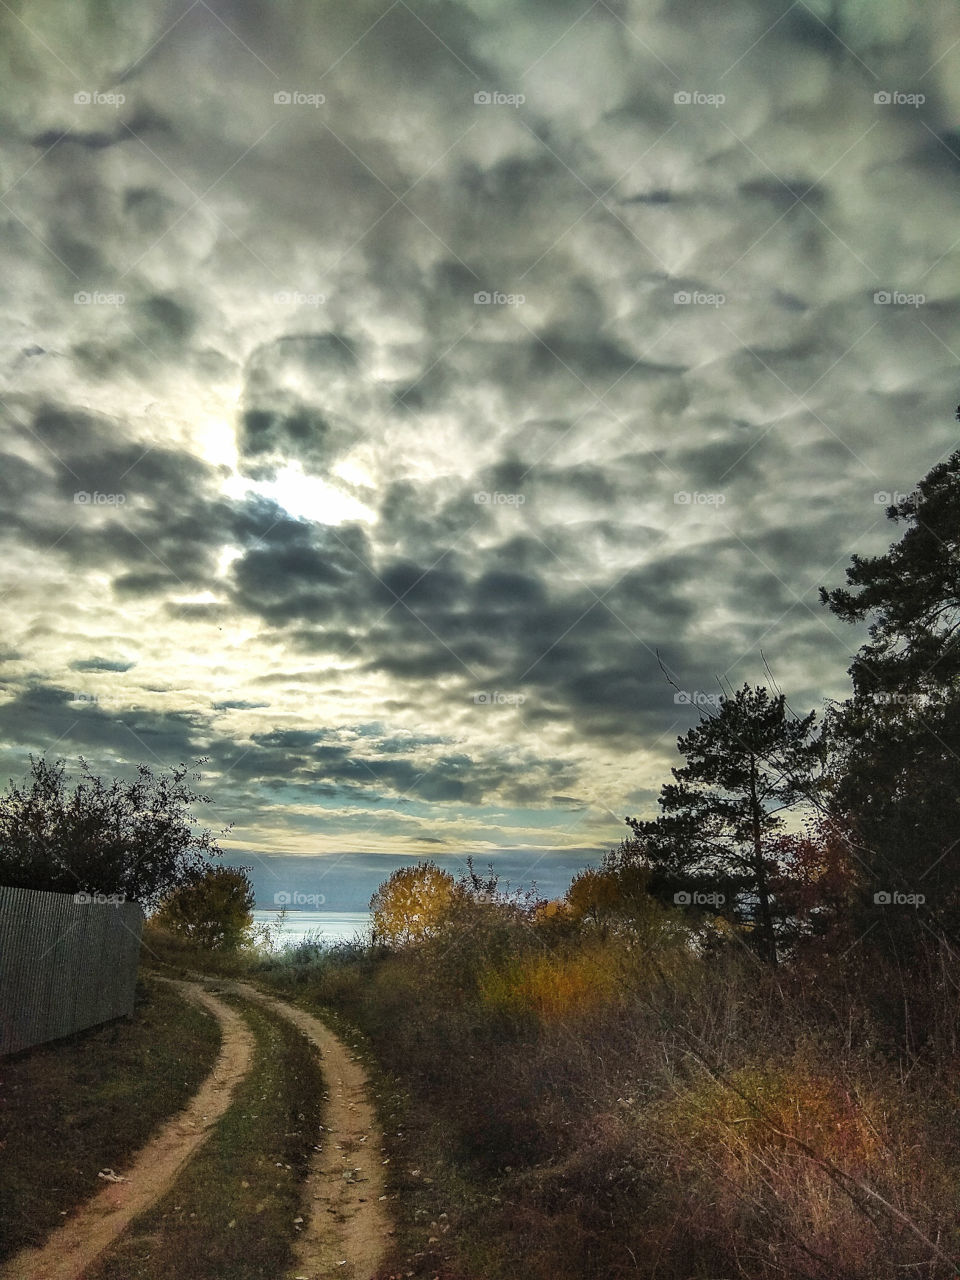 A path with bushes on the side of the road and a yellowing forest against the backdrop of the Volga River (Russia) under a very beautiful cloudy sky on a cloudy autumn evening